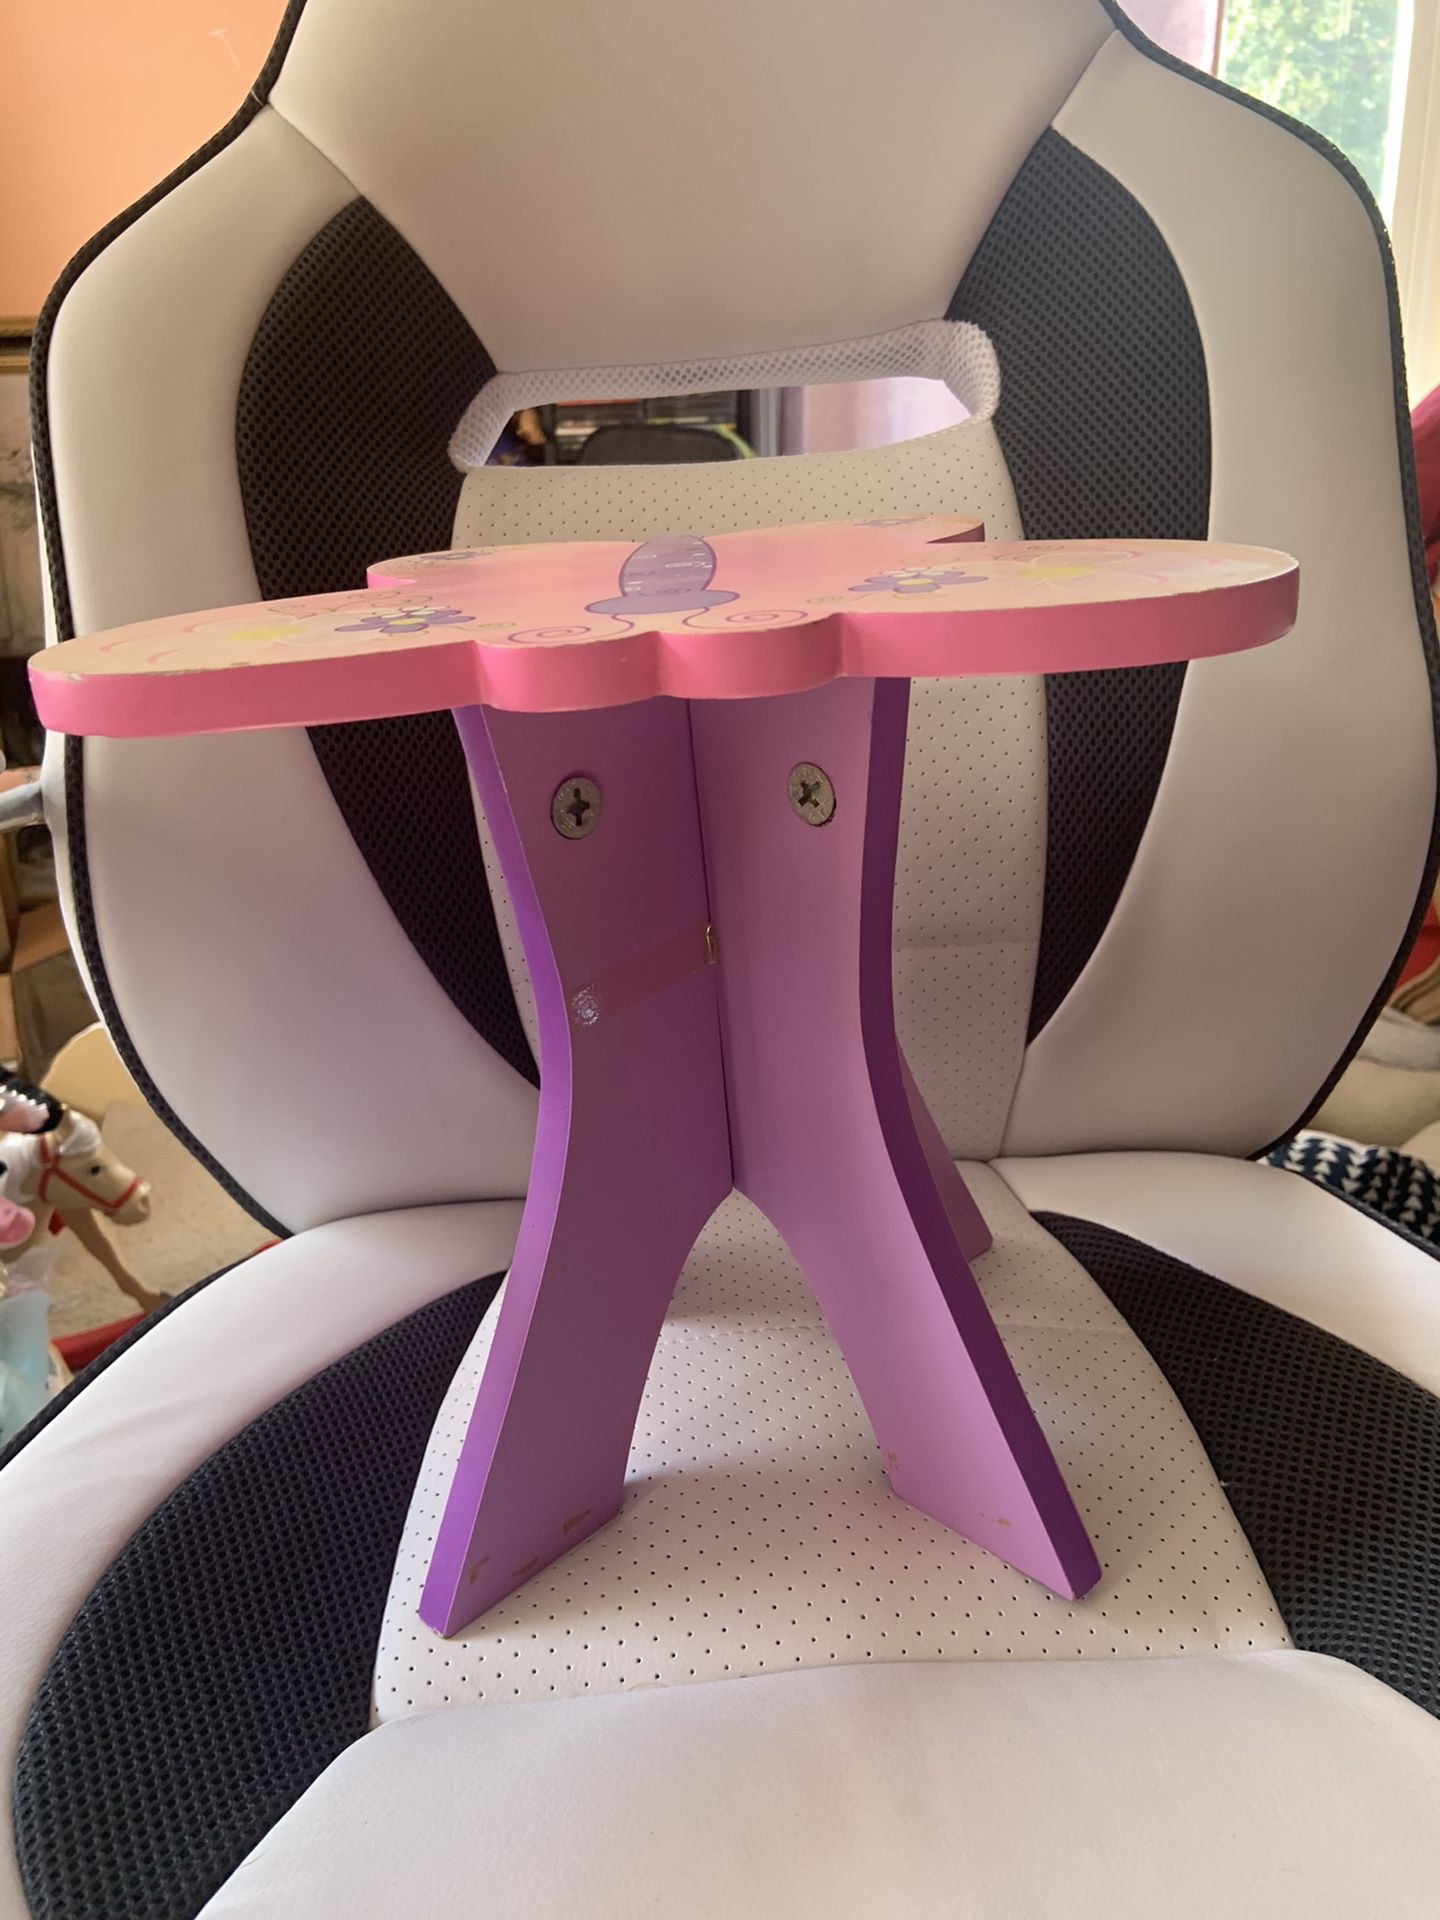 Butterfly shape table for an 18” doll